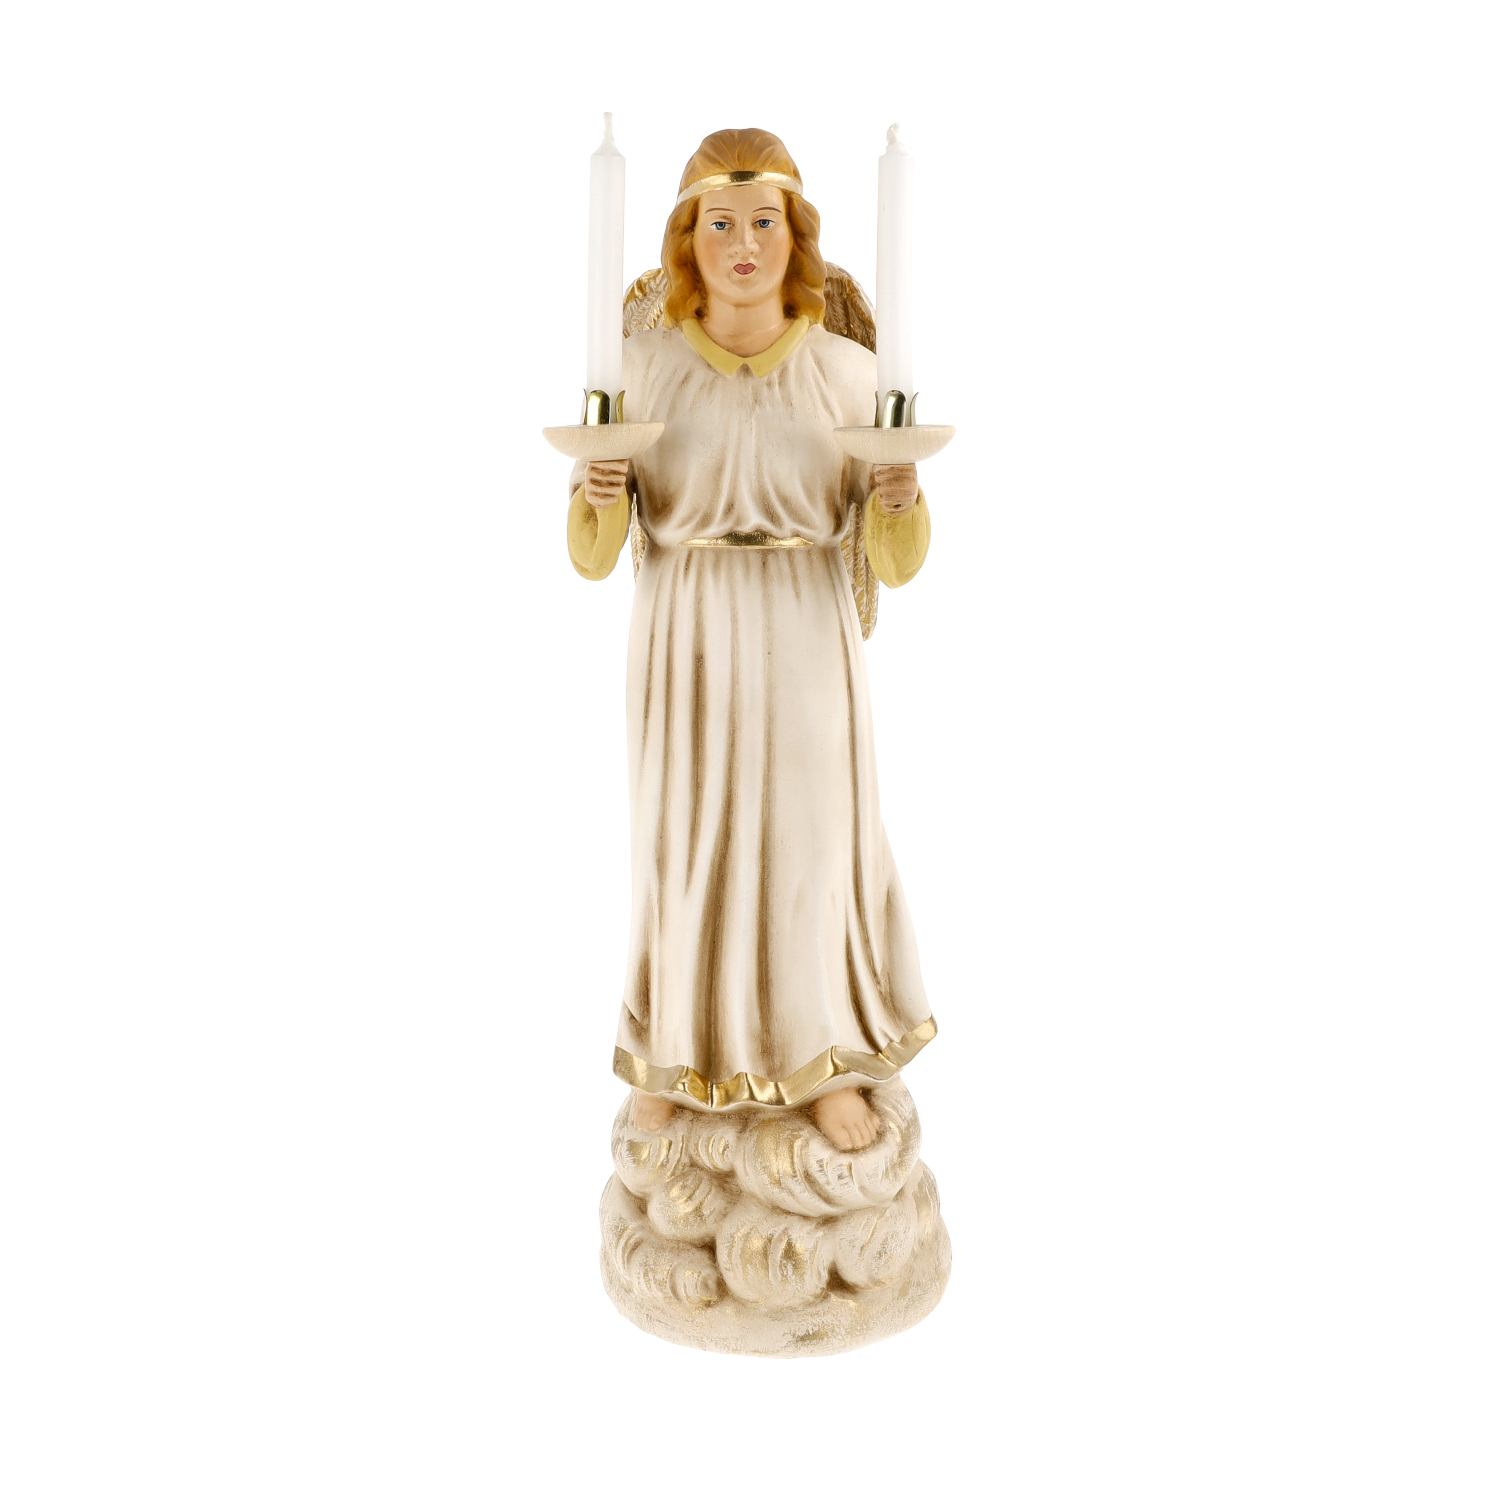 Angel with candles, antique white, large size